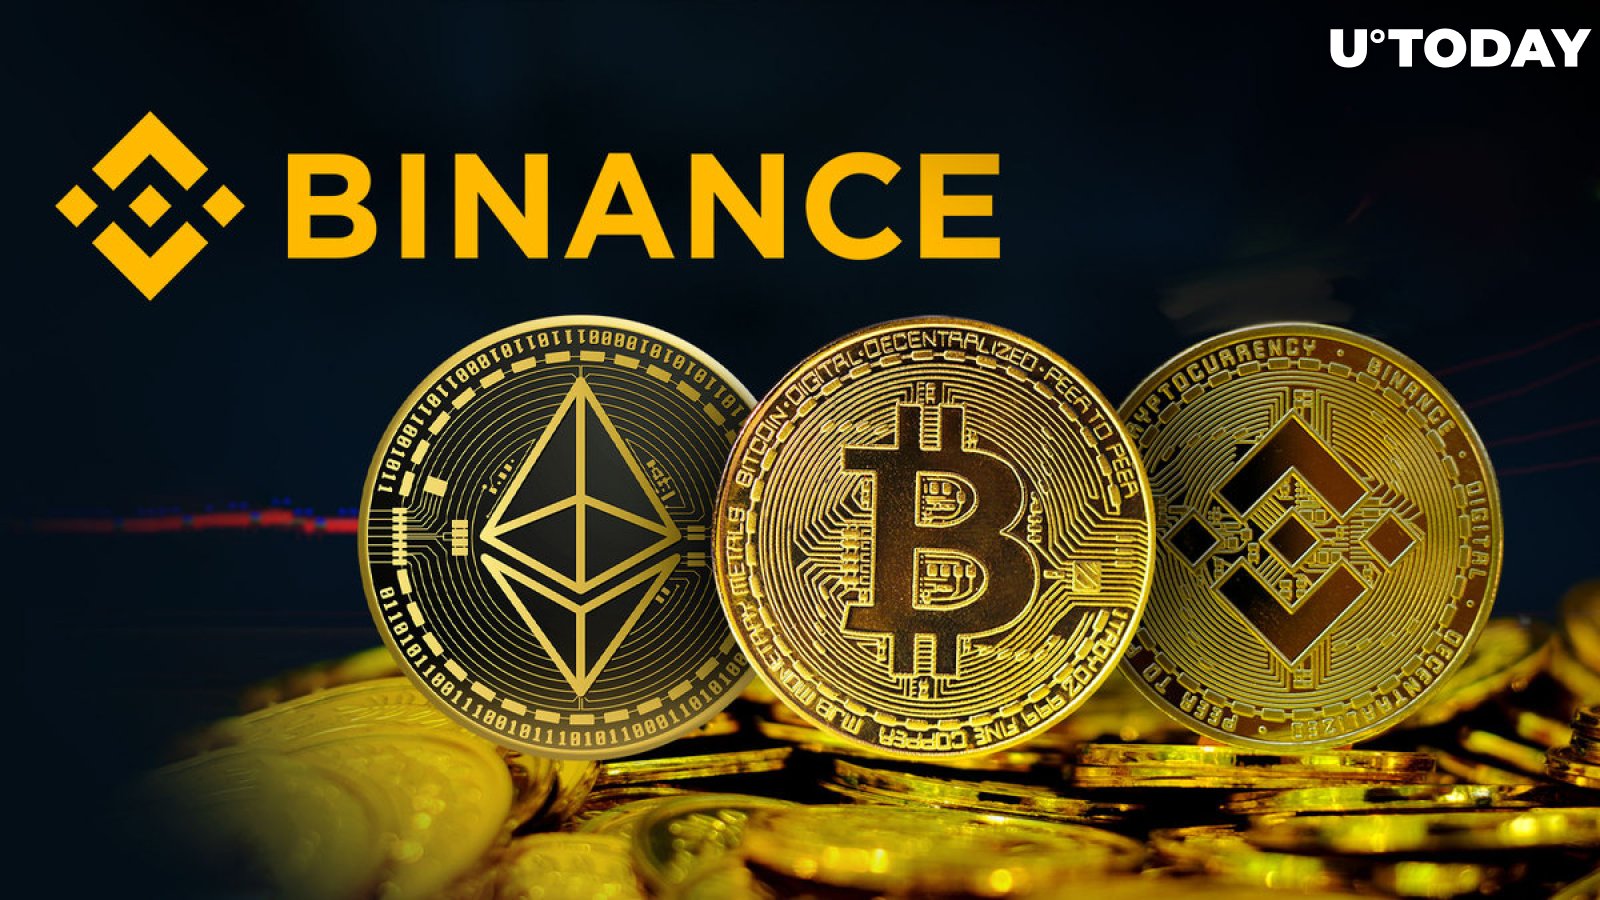 Binance to Delist Six Bitcoin, Ethereum and BNB Trading Pairs